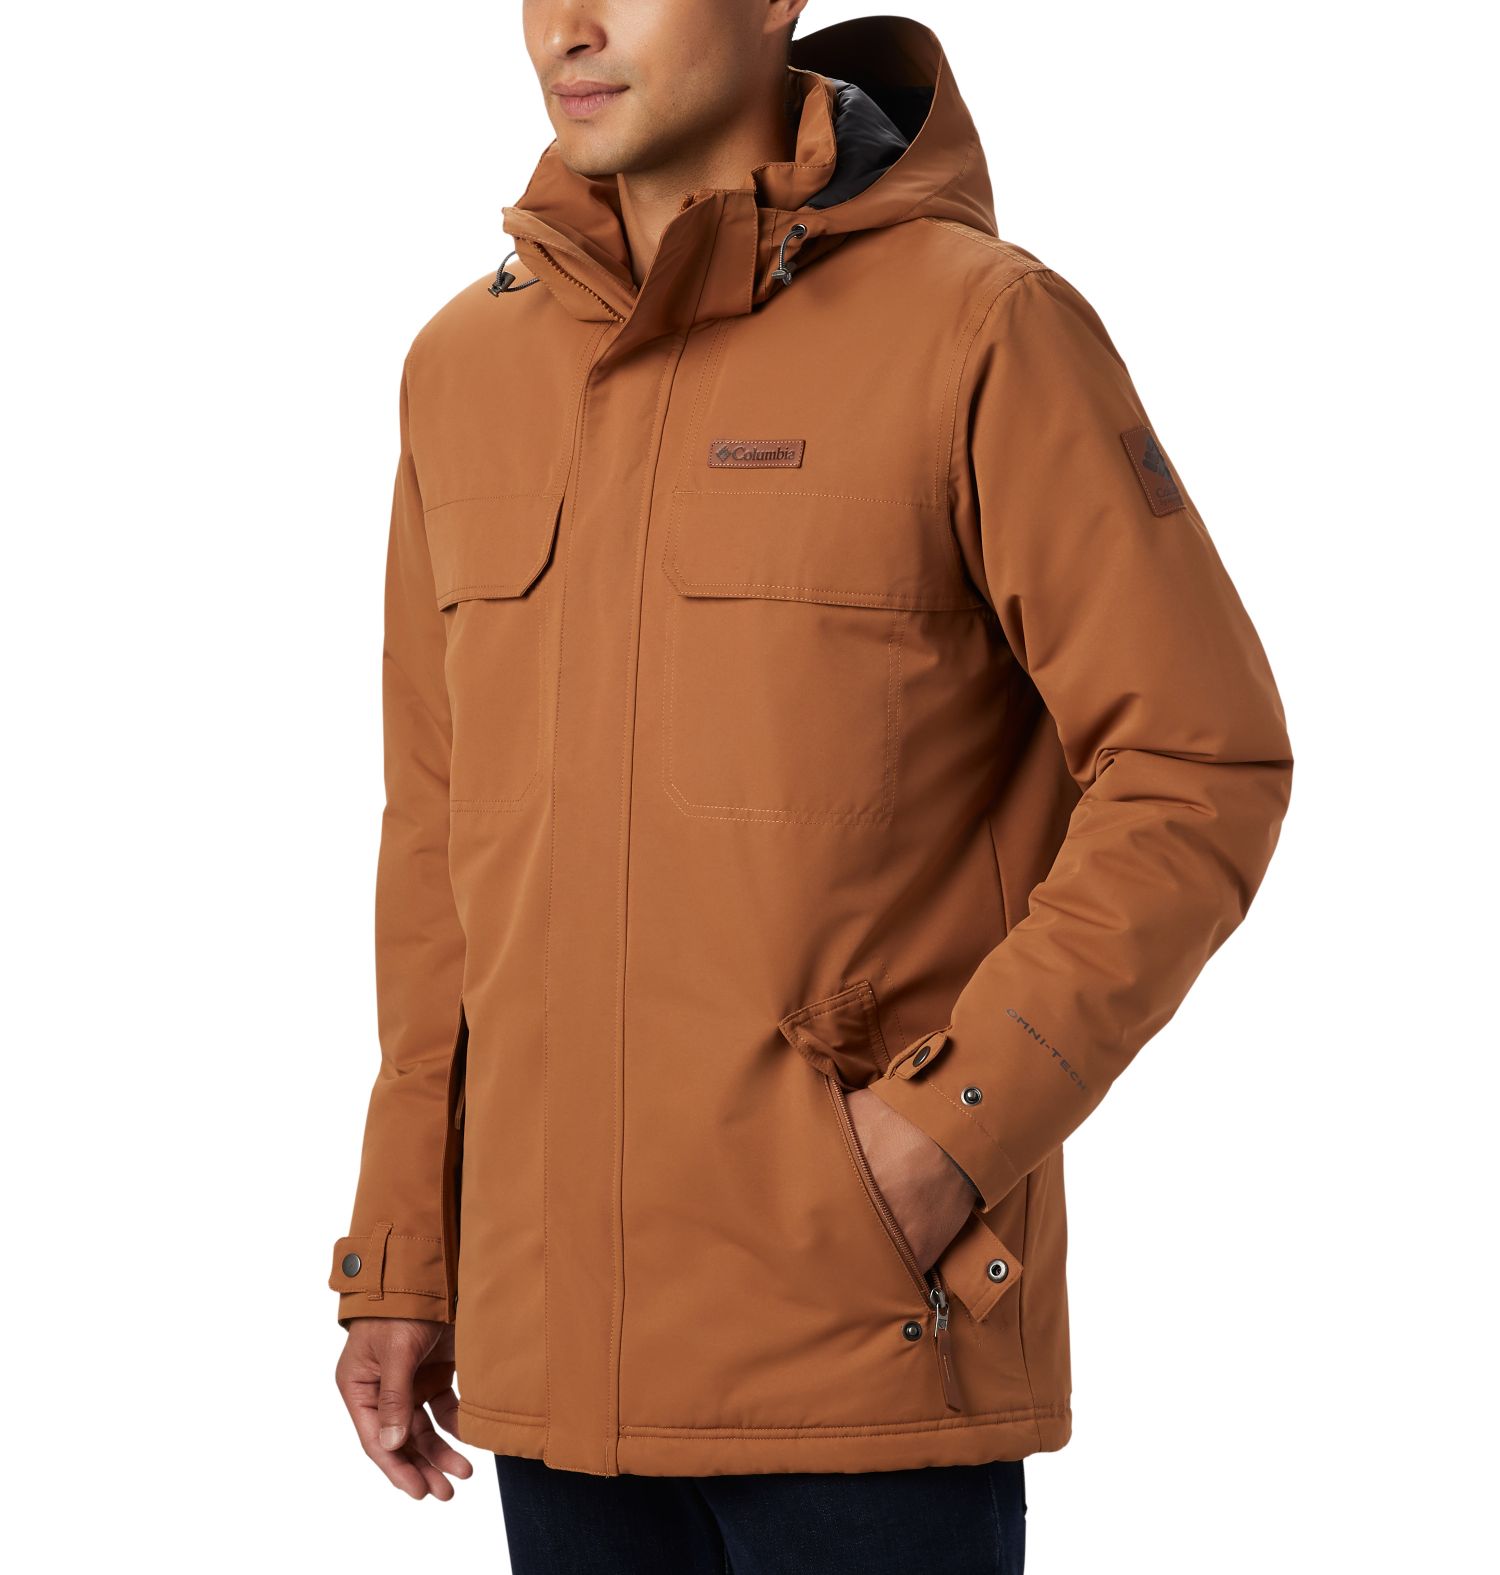 CHAQUETON RUGGED PATH 100% POLYESTER 160G Omni-HEAT THERMAL REFLECTIVE INSULATION Omni-TECH WATERPROOF BREATHABLE CAMEL BROWN